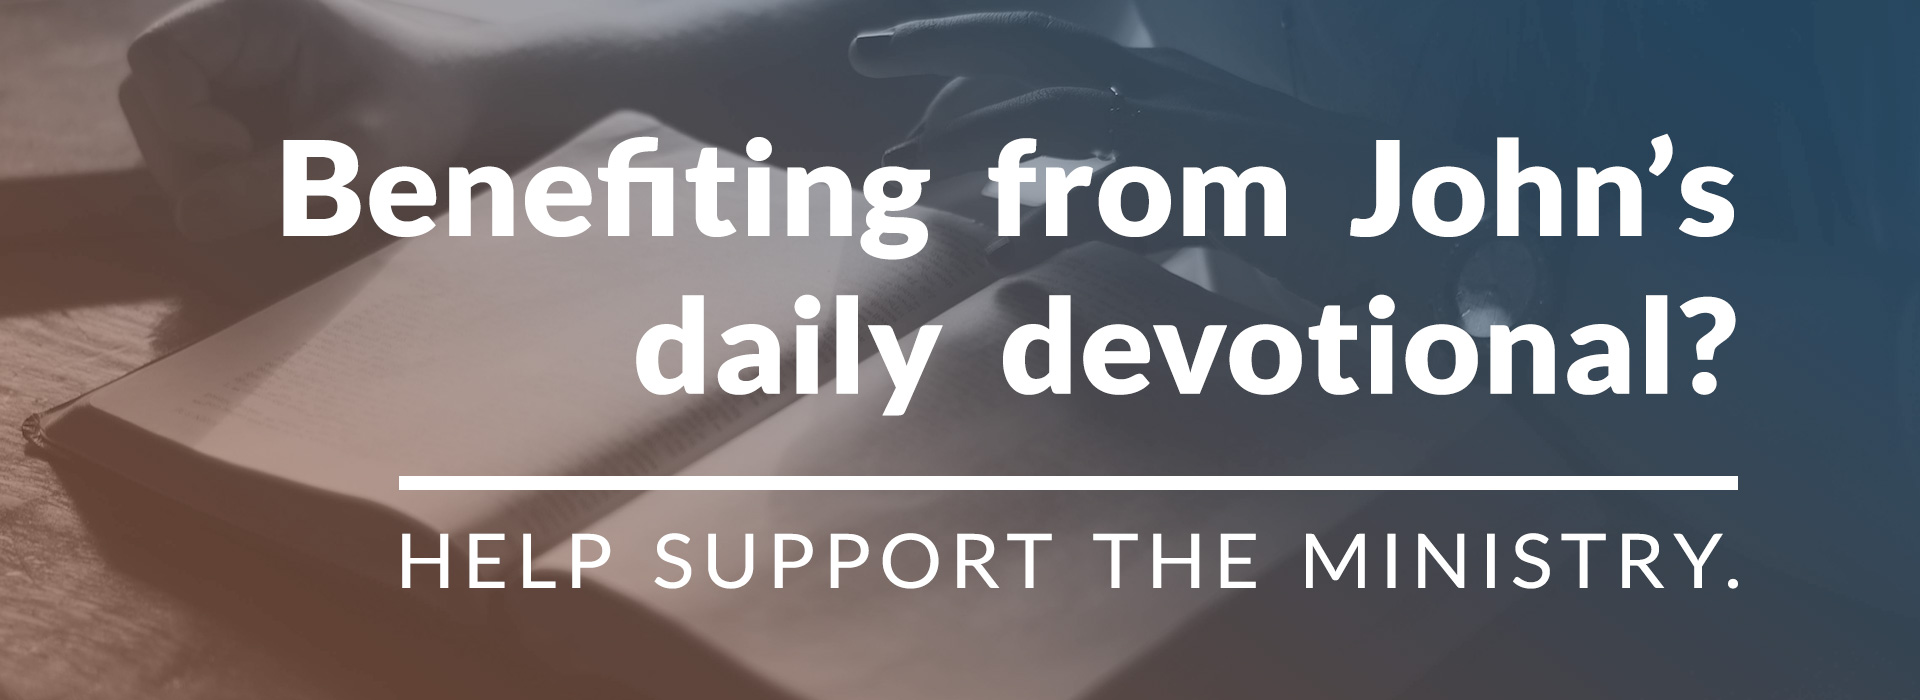 Benefiting from John’s daily devotional?  Help support the ministry.